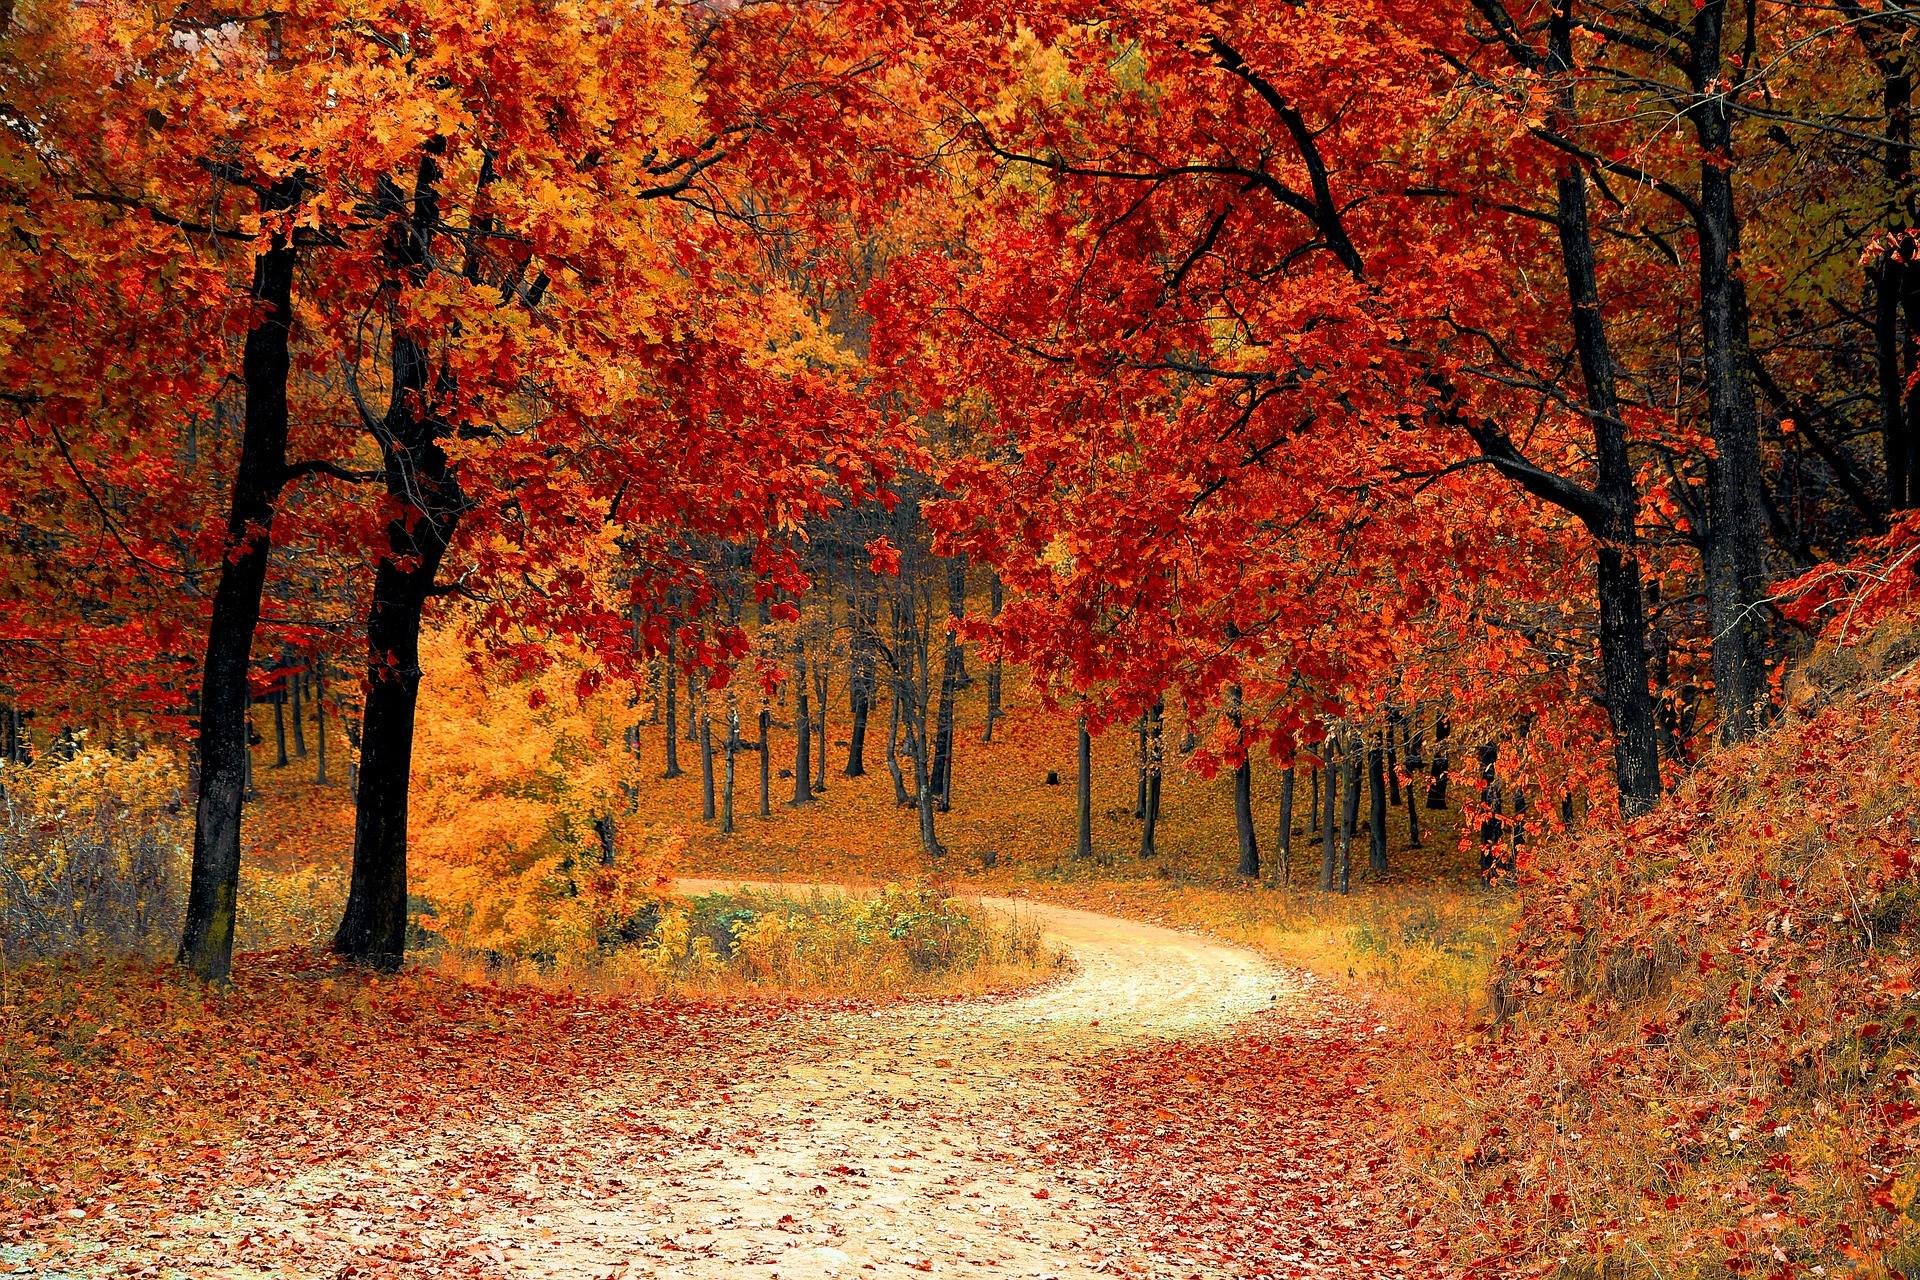 A track surrounded by beautiful autumn leaves in a secluded, wooded area near the grounds of a French chateau.